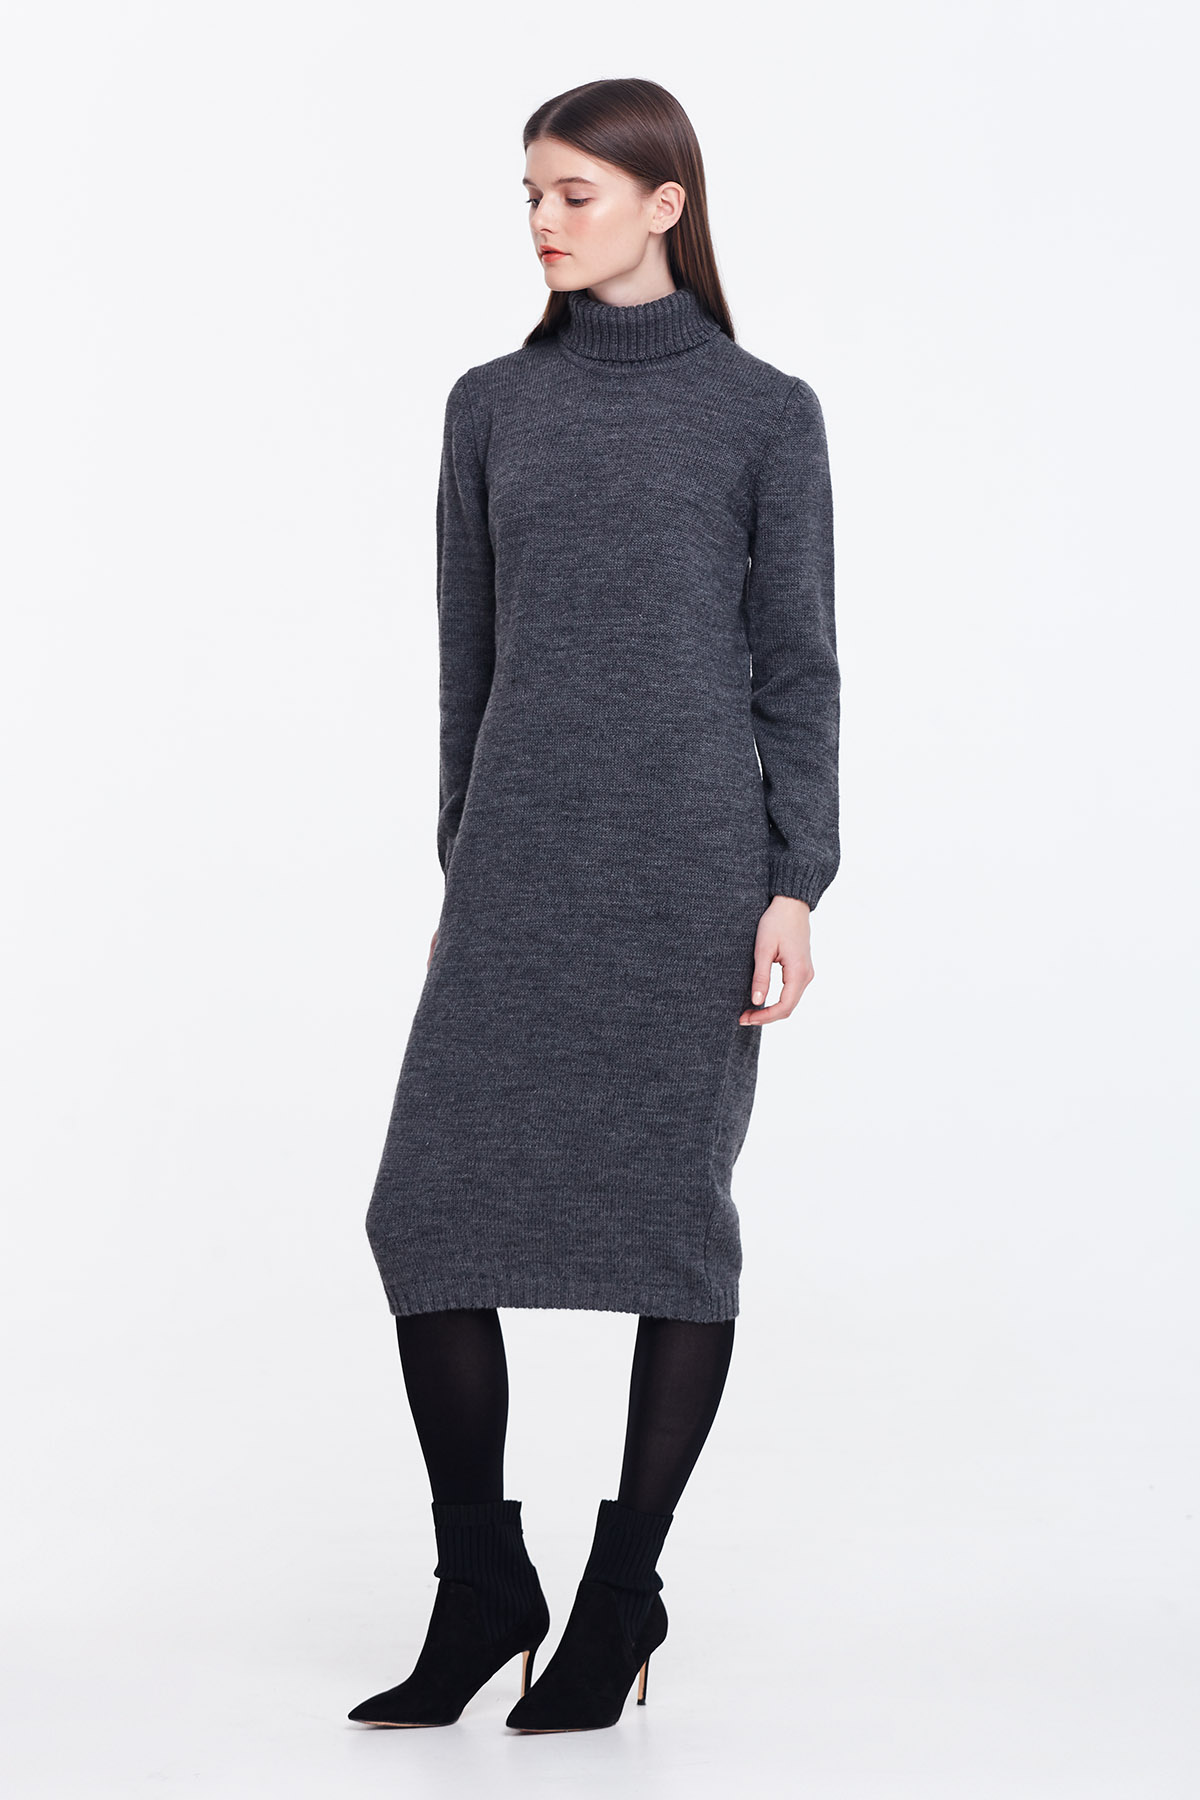 Grey knit dress with a stand up collar, photo 4